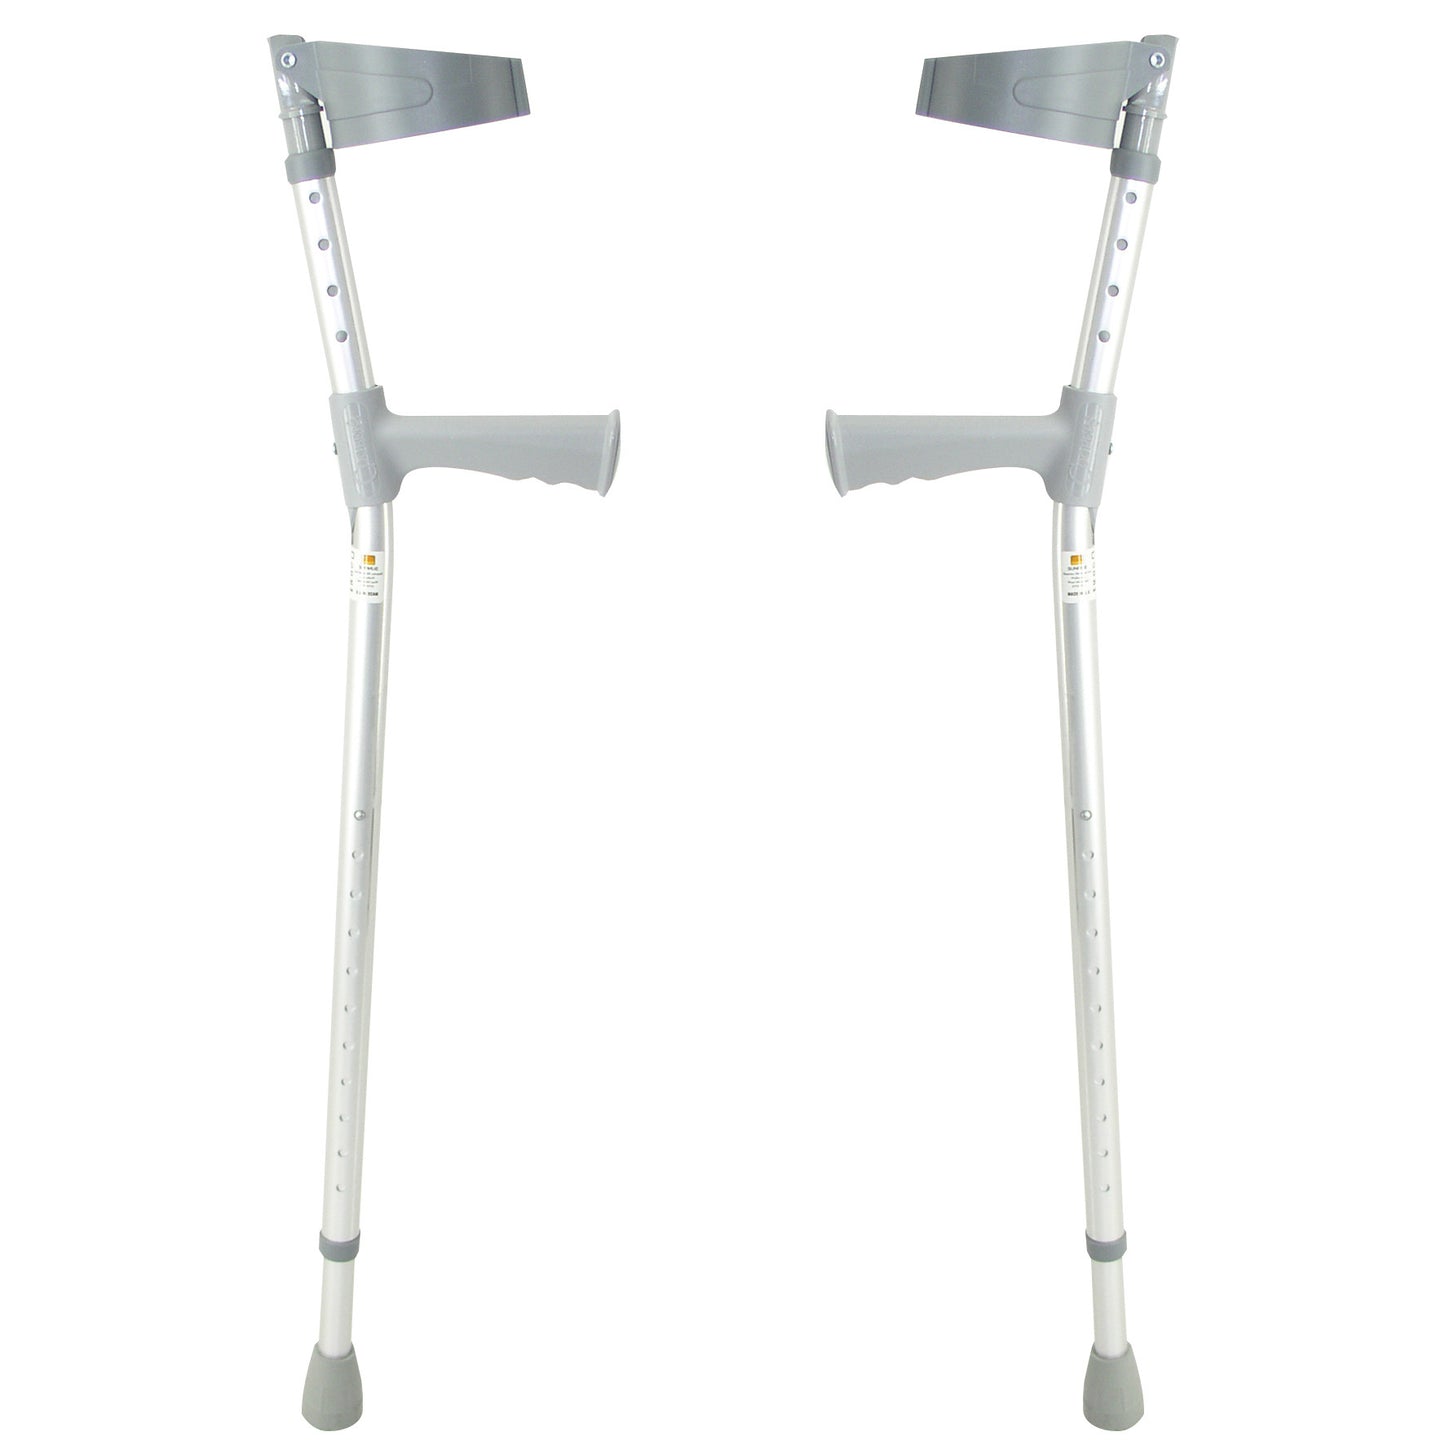 Coopers Double adjustable elbow crutches 1 pair